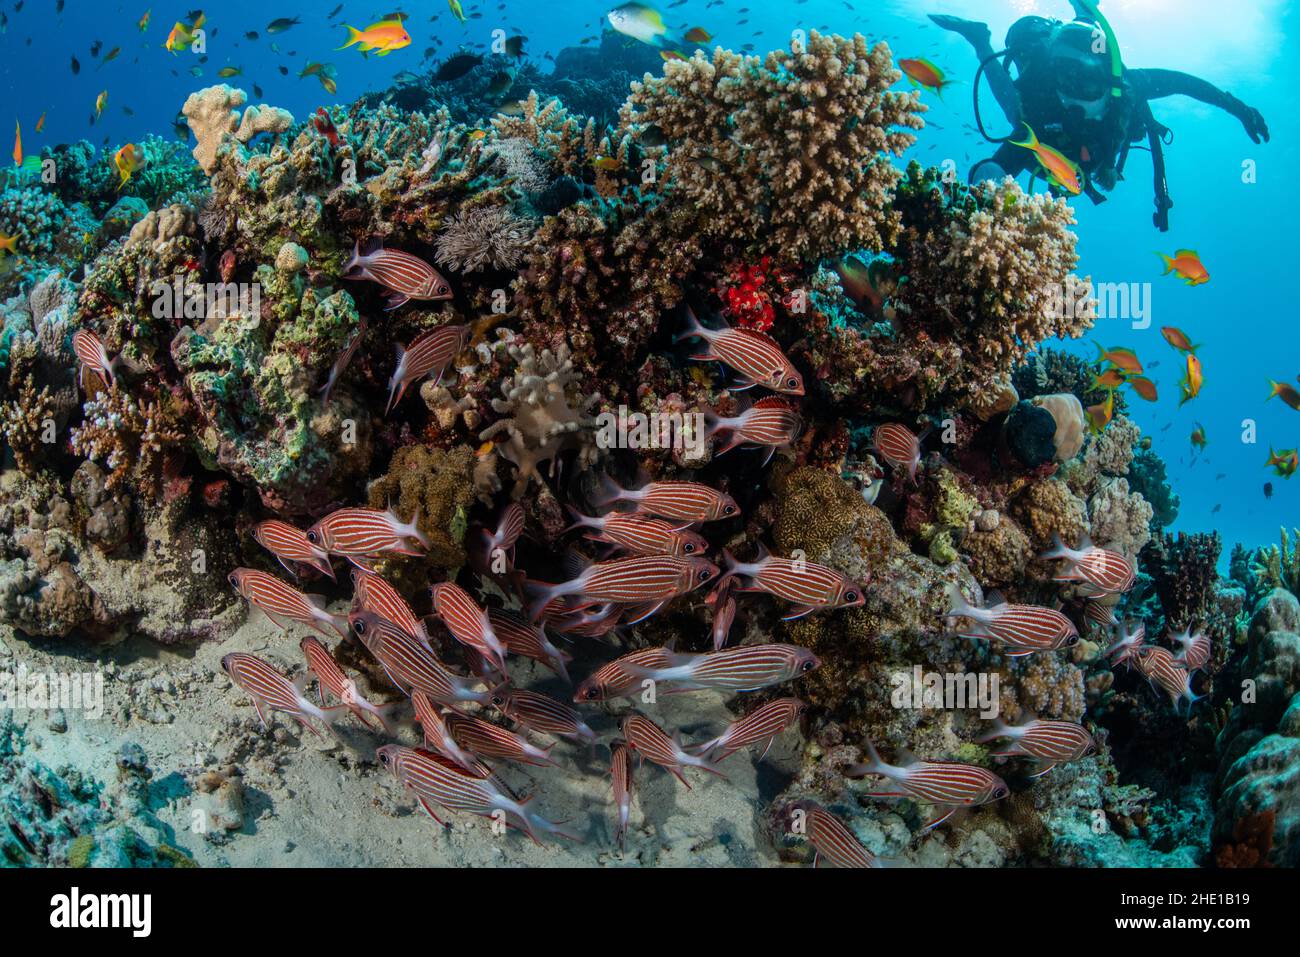 Crown squirrelfish (Sargocentron diadema) and other fish including lyretail anthias on a coral reef as a scuba diver approaches in the Red sea, Egypt. Stock Photo